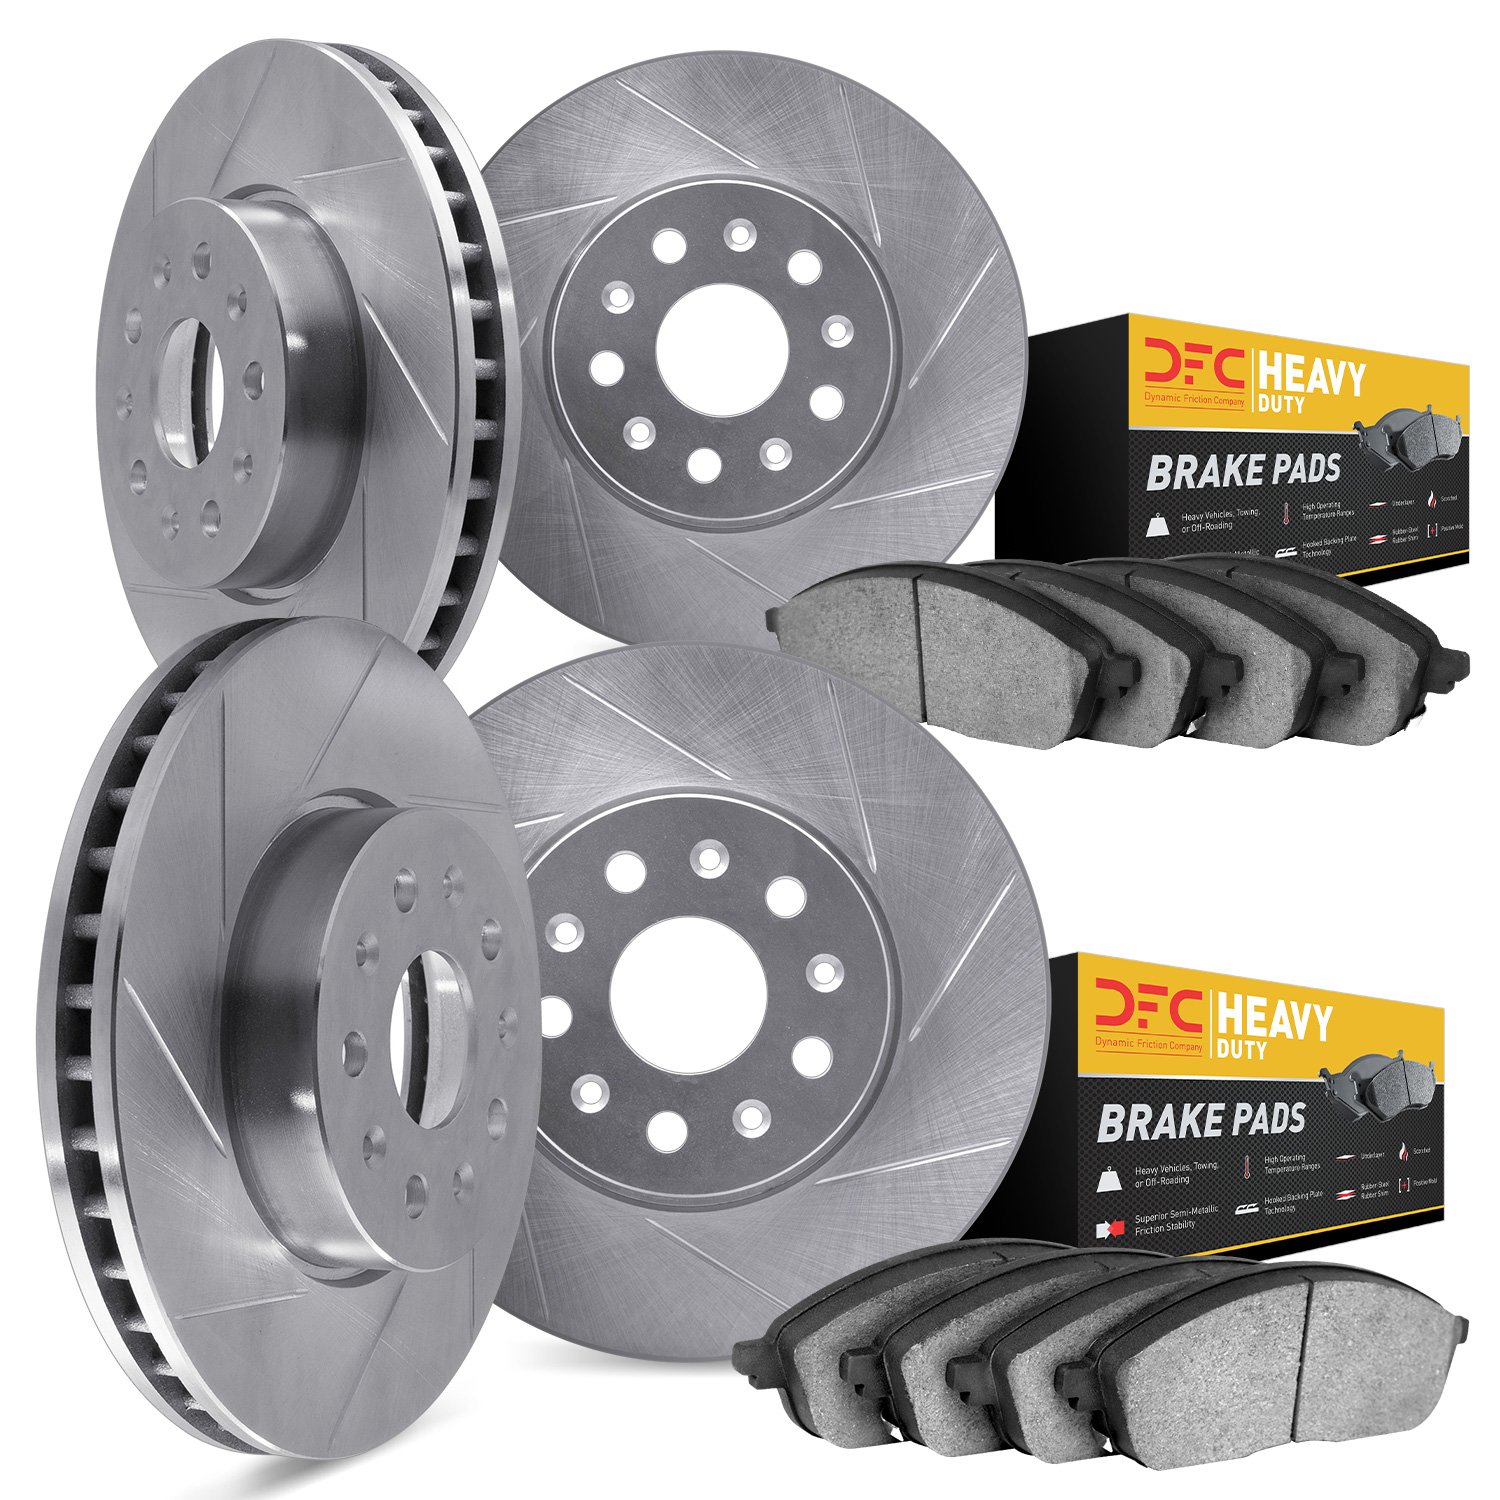 5204-99123 Slotted Brake Rotors w/Heavy-Duty Brake Pads Kits [Silver], 2013-2016 Ford/Lincoln/Mercury/Mazda, Position: Front and